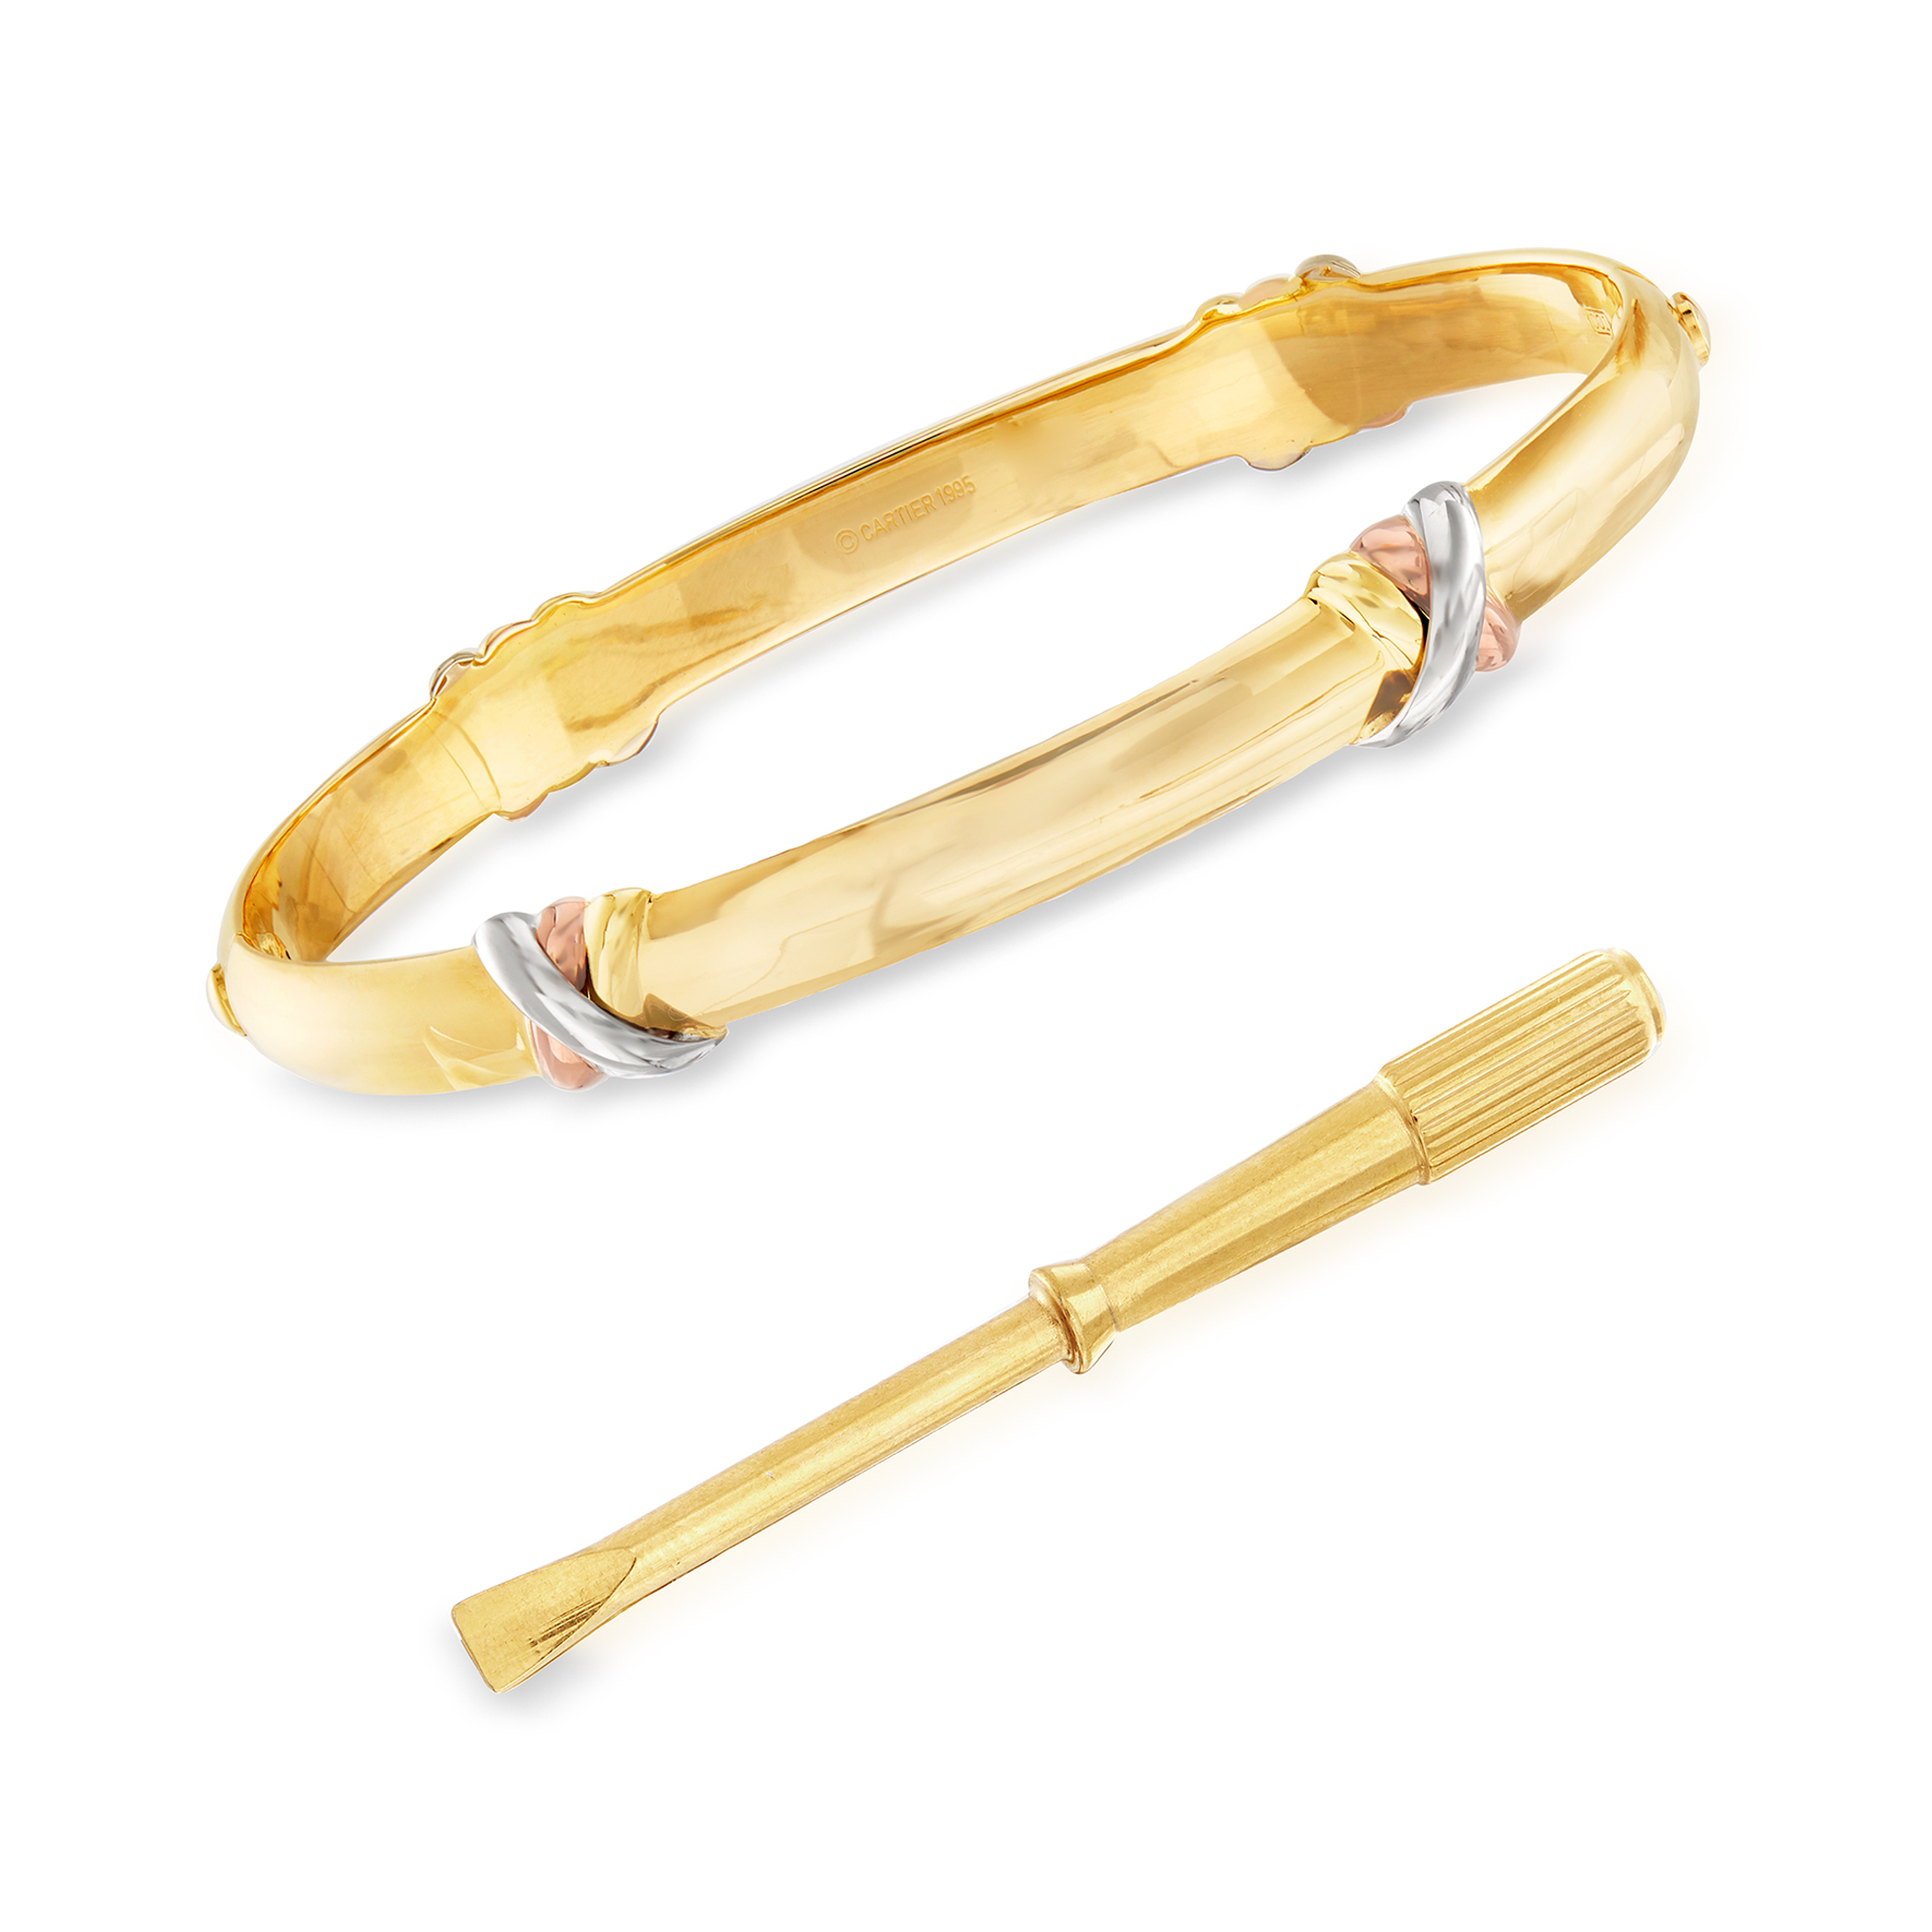 C. 1990 Vintage Cartier Trinity Bracelet in 18kt Tri-Colored Gold with  Screwdriver | Ross-Simons